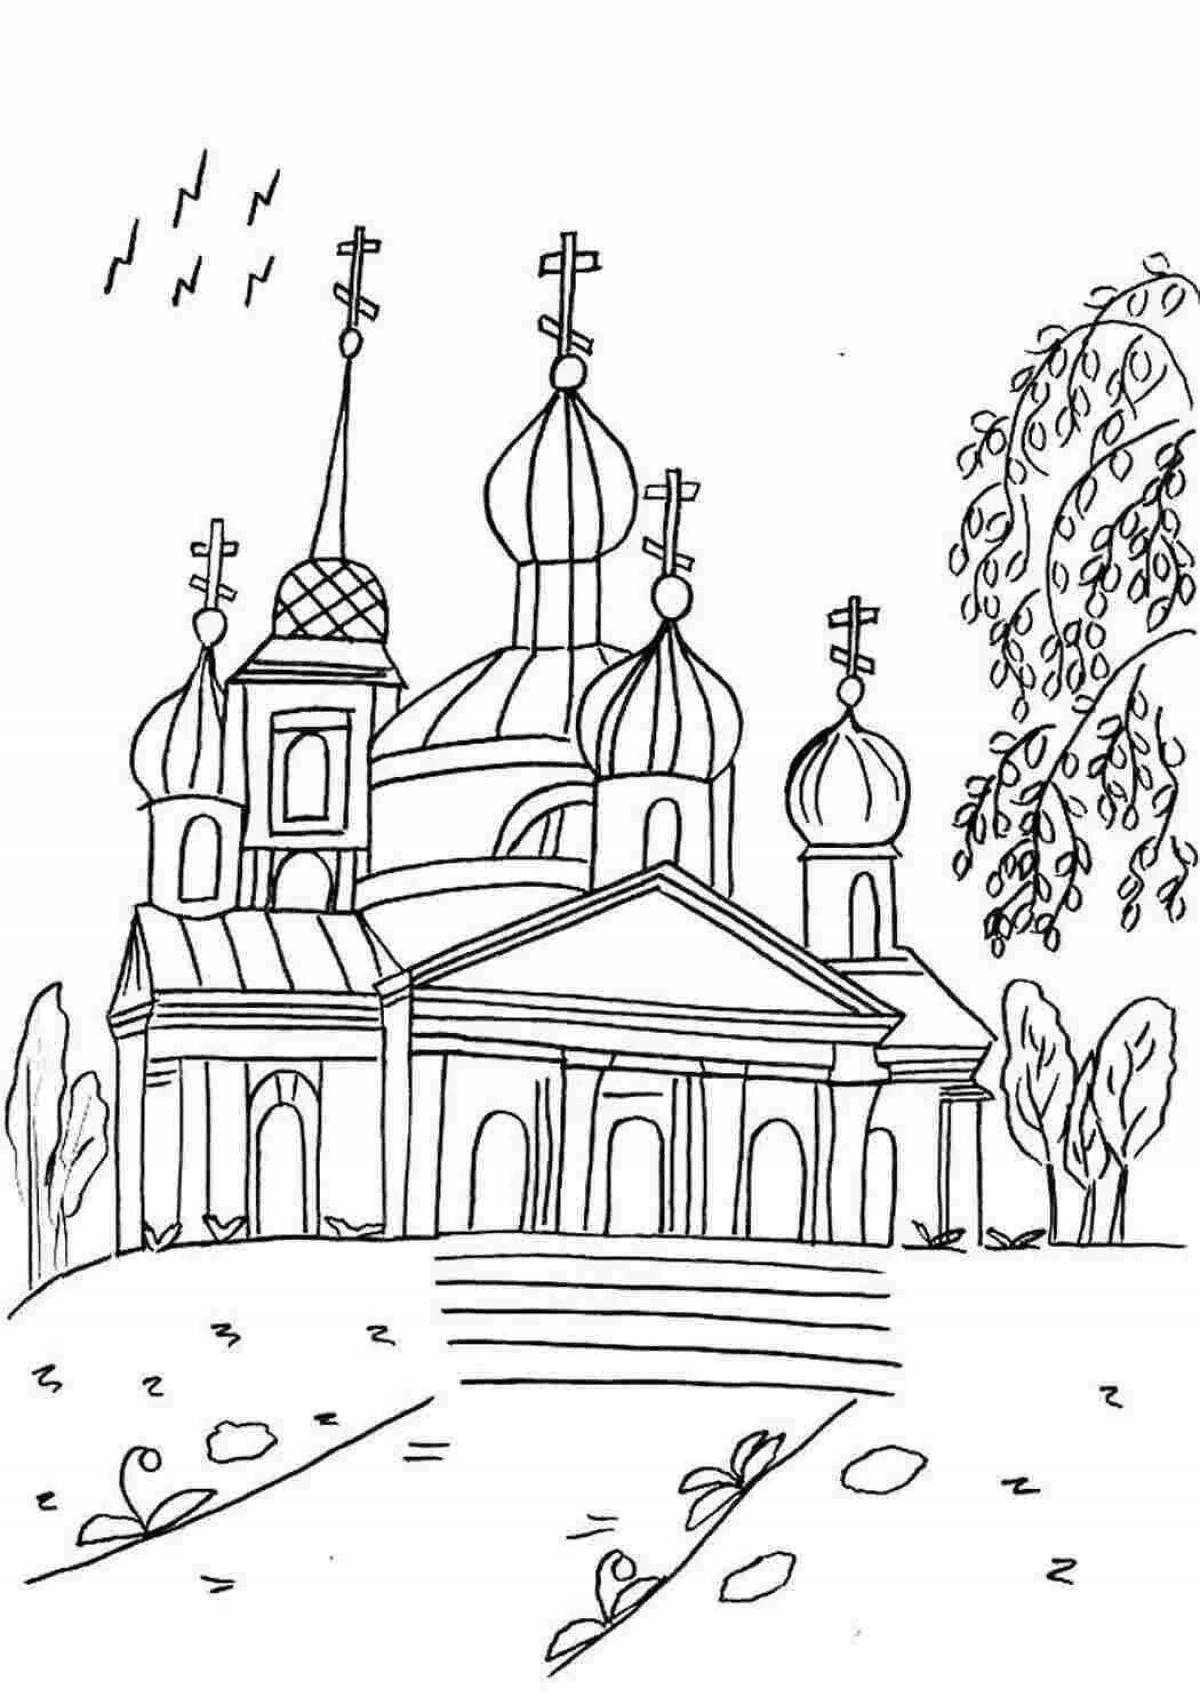 Radiant monastery coloring page